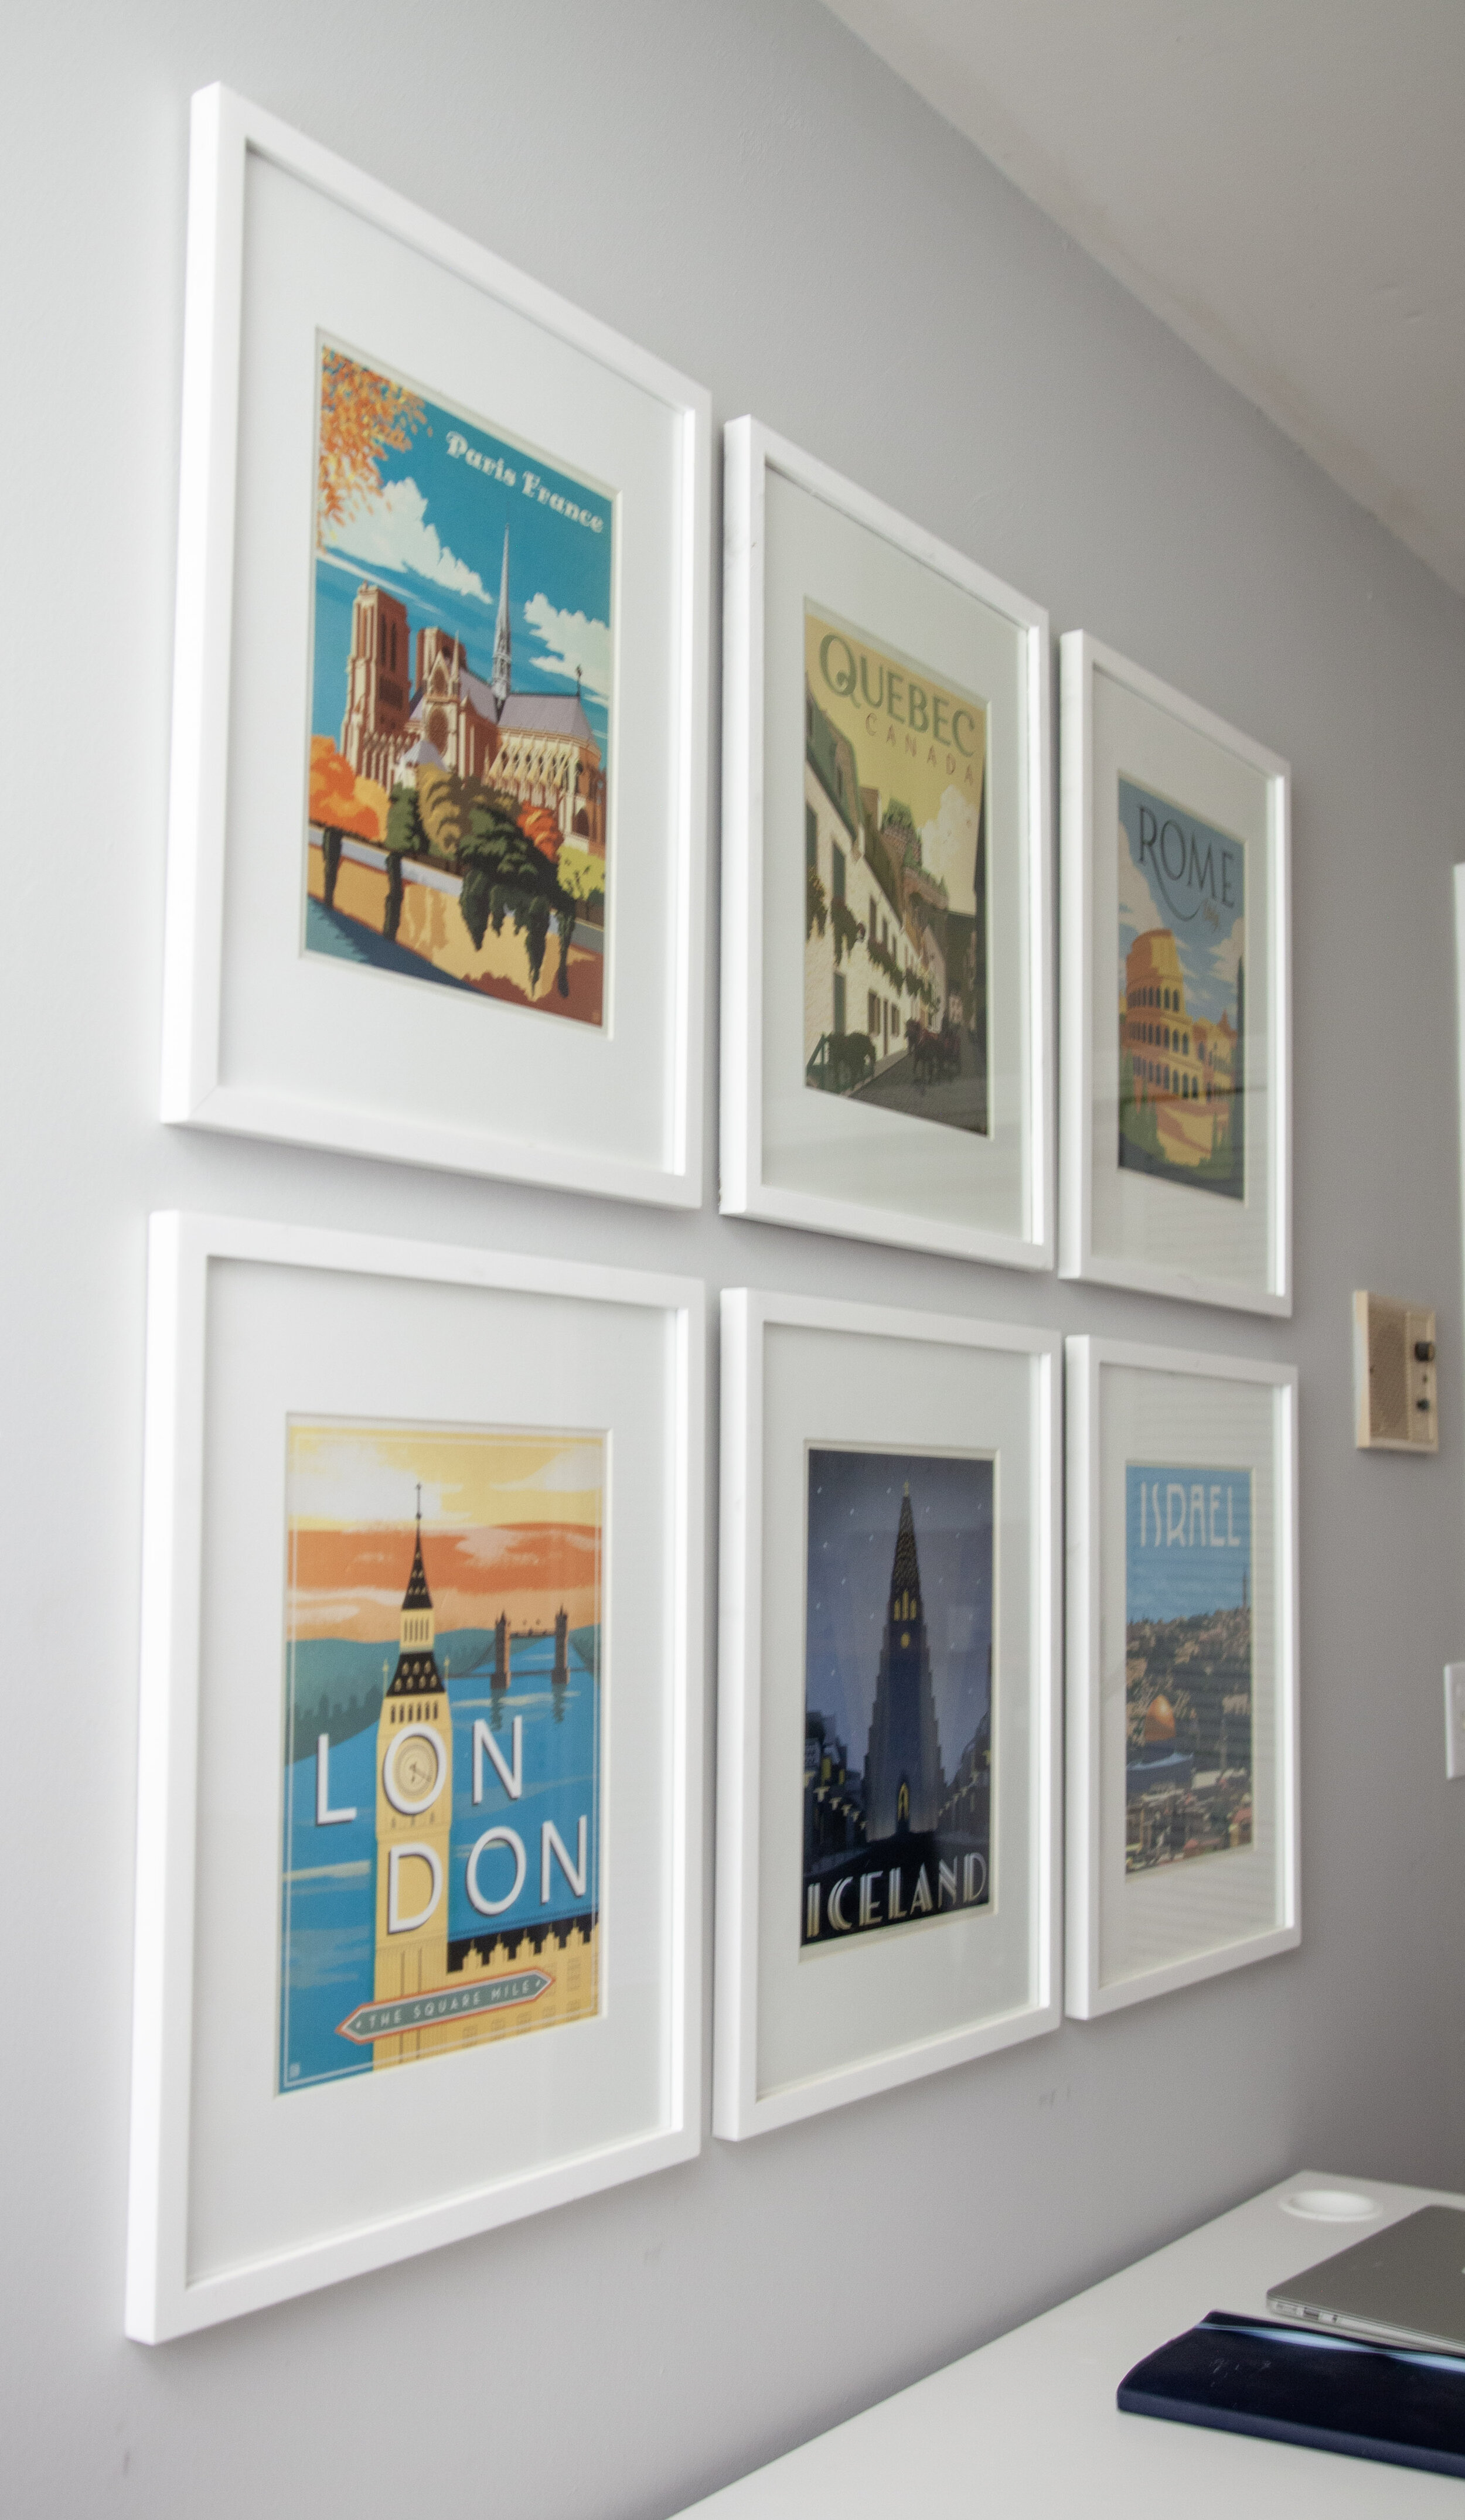 Jeremy - I’m loving the gallery wall I just hung above my desk! All the pieces are art prints from one of our favorite local Nashville shops - Anderson Design Group